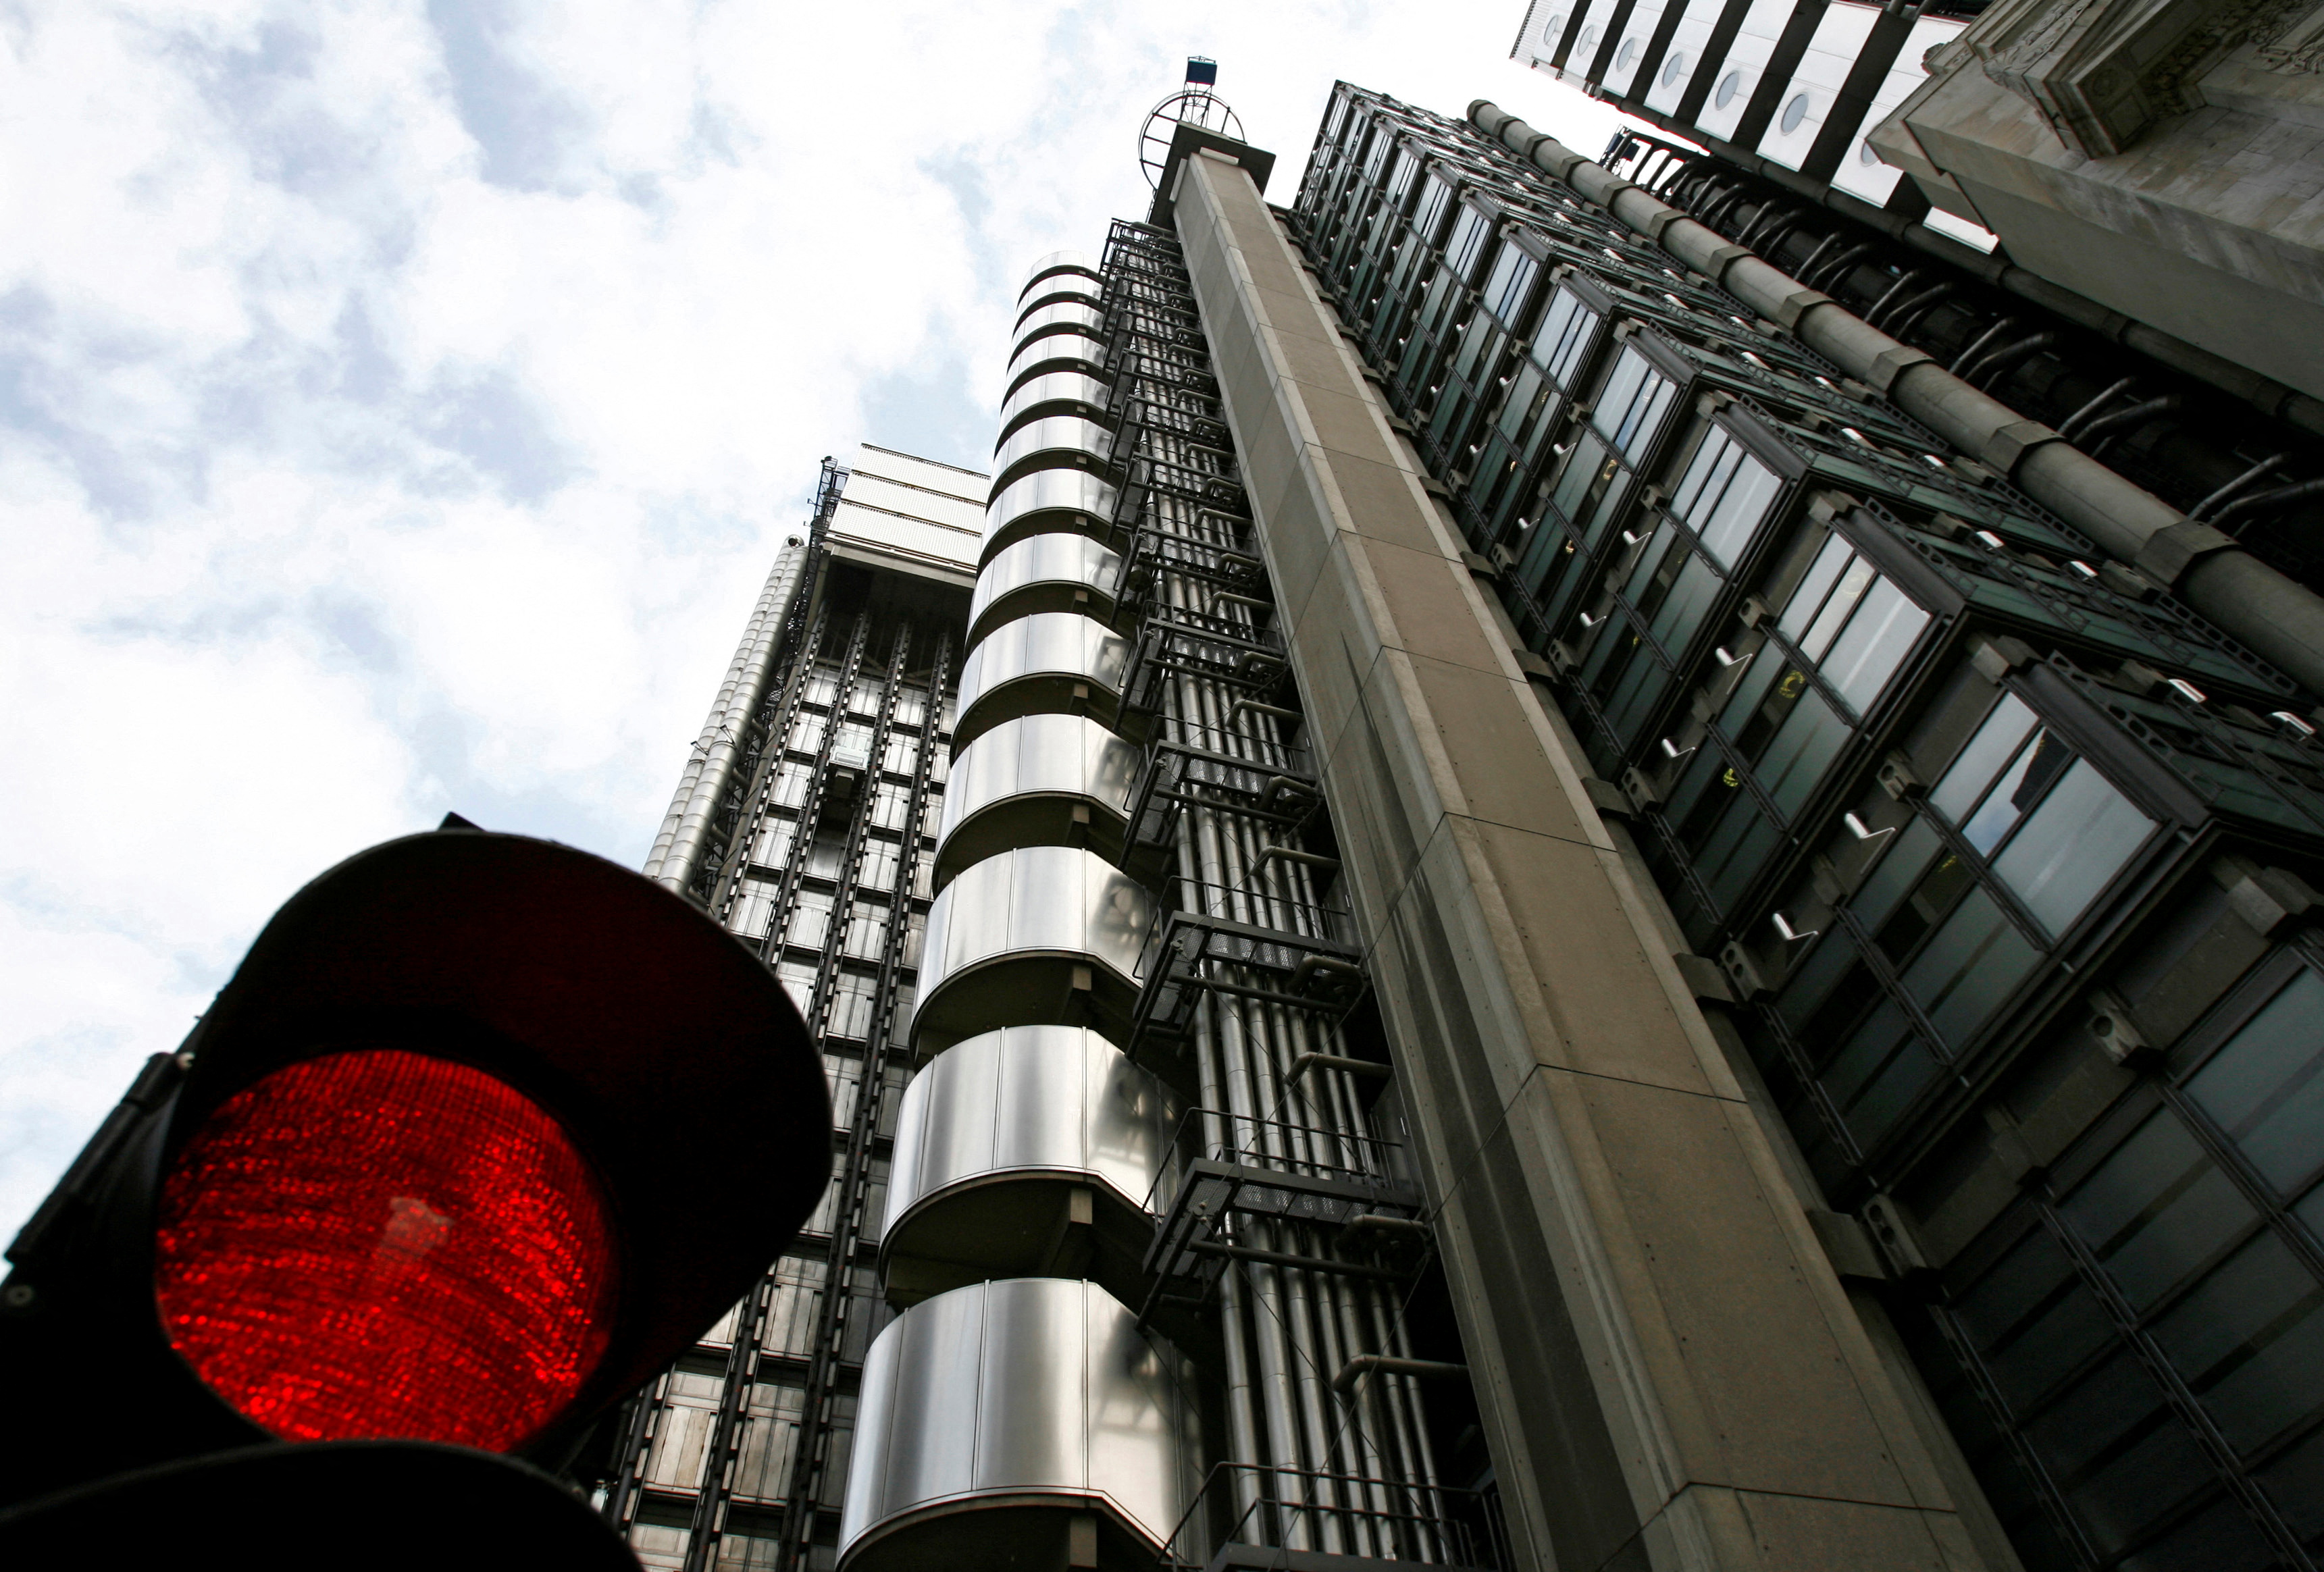 The Lloyds building is seen behind a temporary traffic signal in the city of London